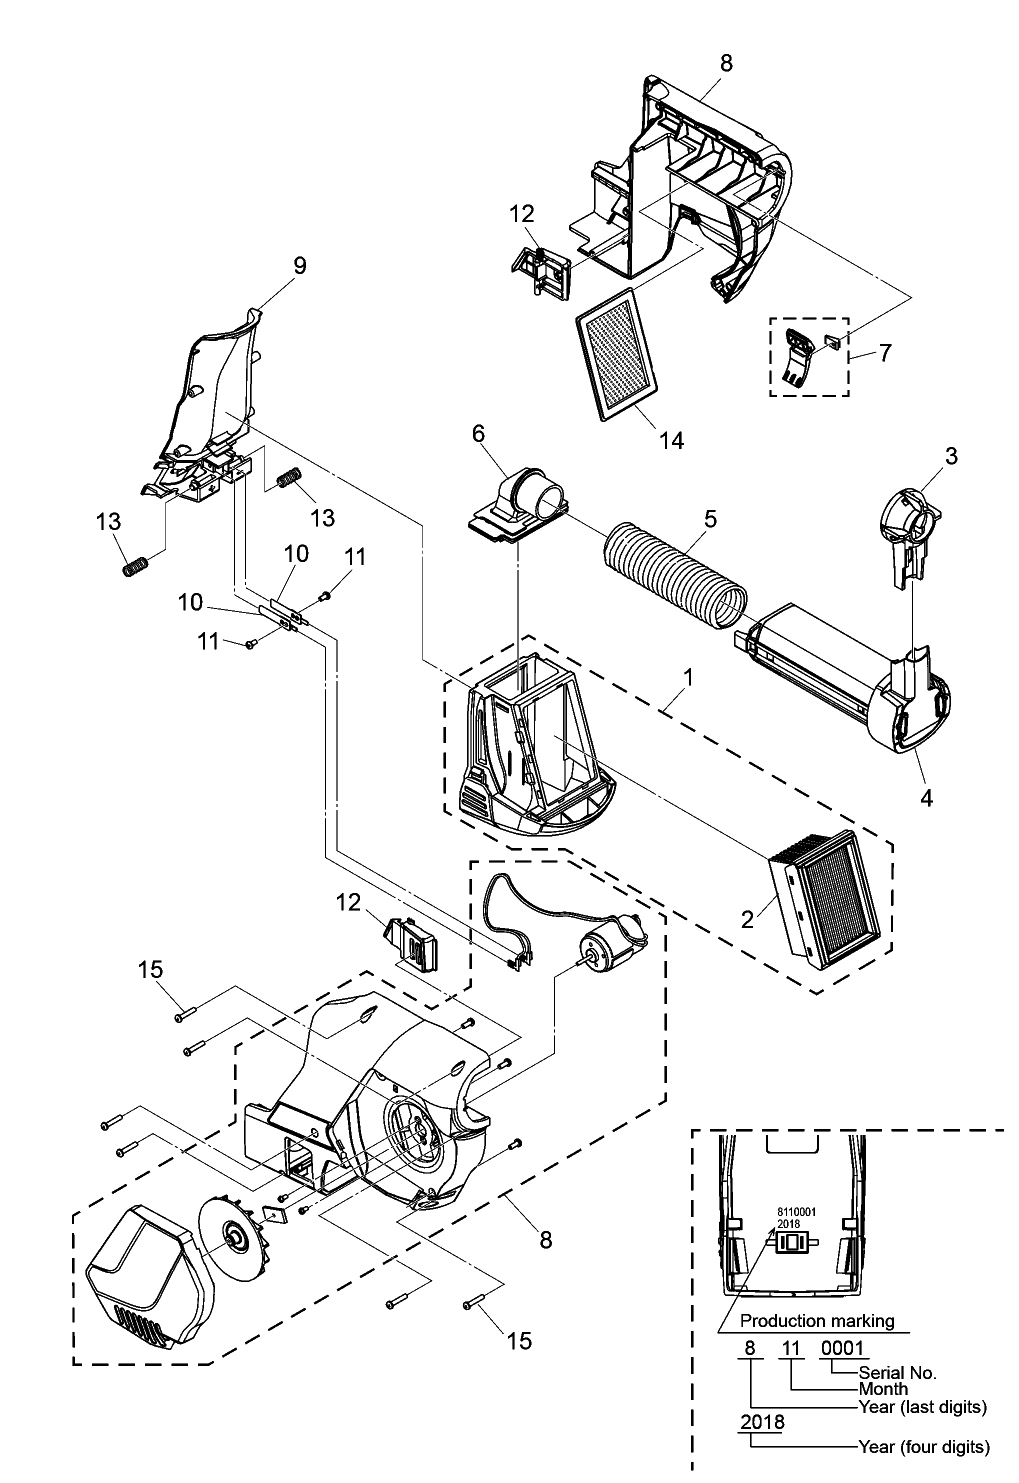 EY9: Exploded View